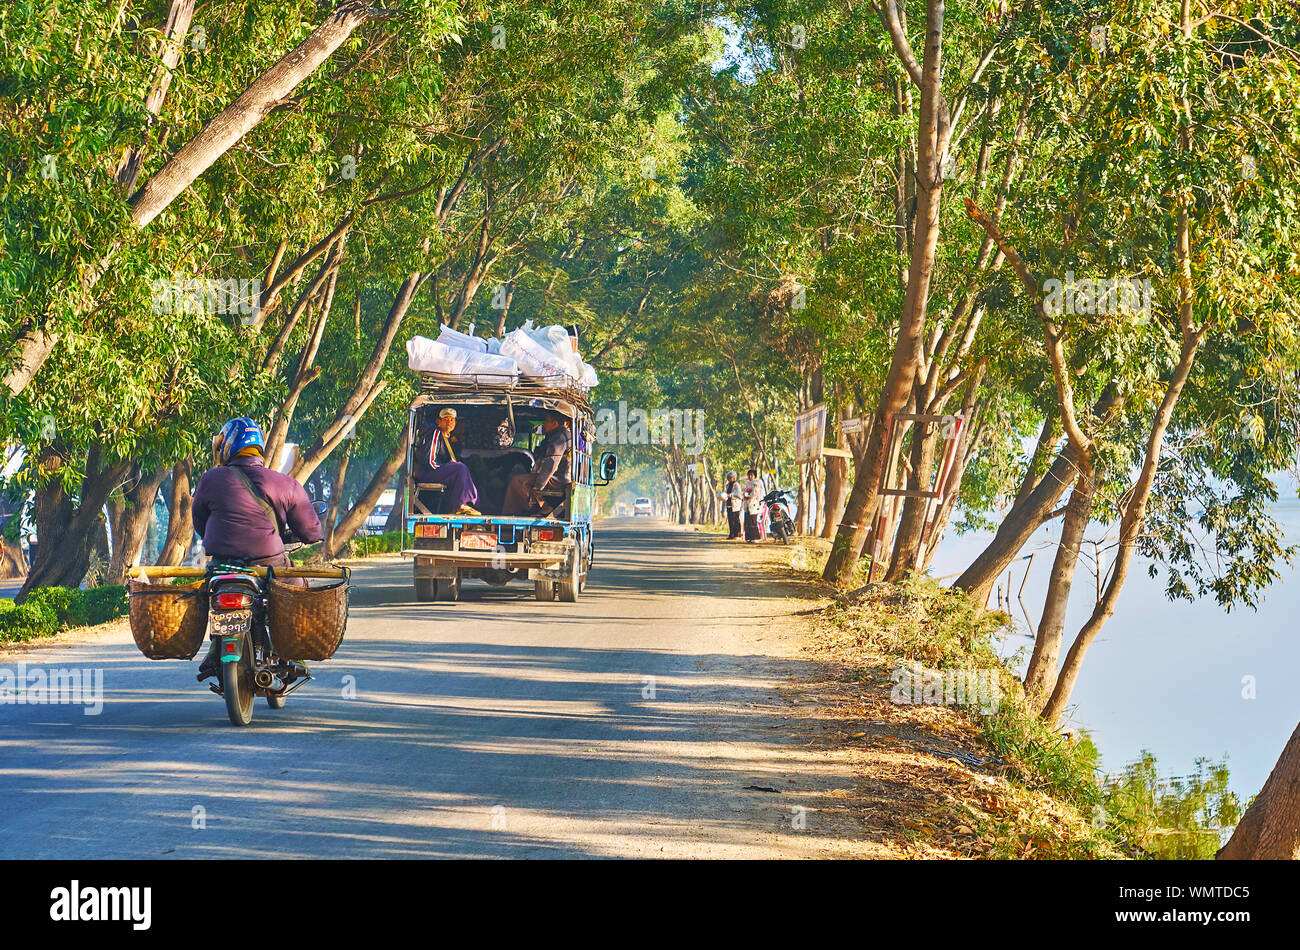 NYAUNGSHWE, MYANMAR - FEBRUARY 20, 2018: The traffic along the intercity road with green trees on both sides, the old truck rides with villagers in it Stock Photo